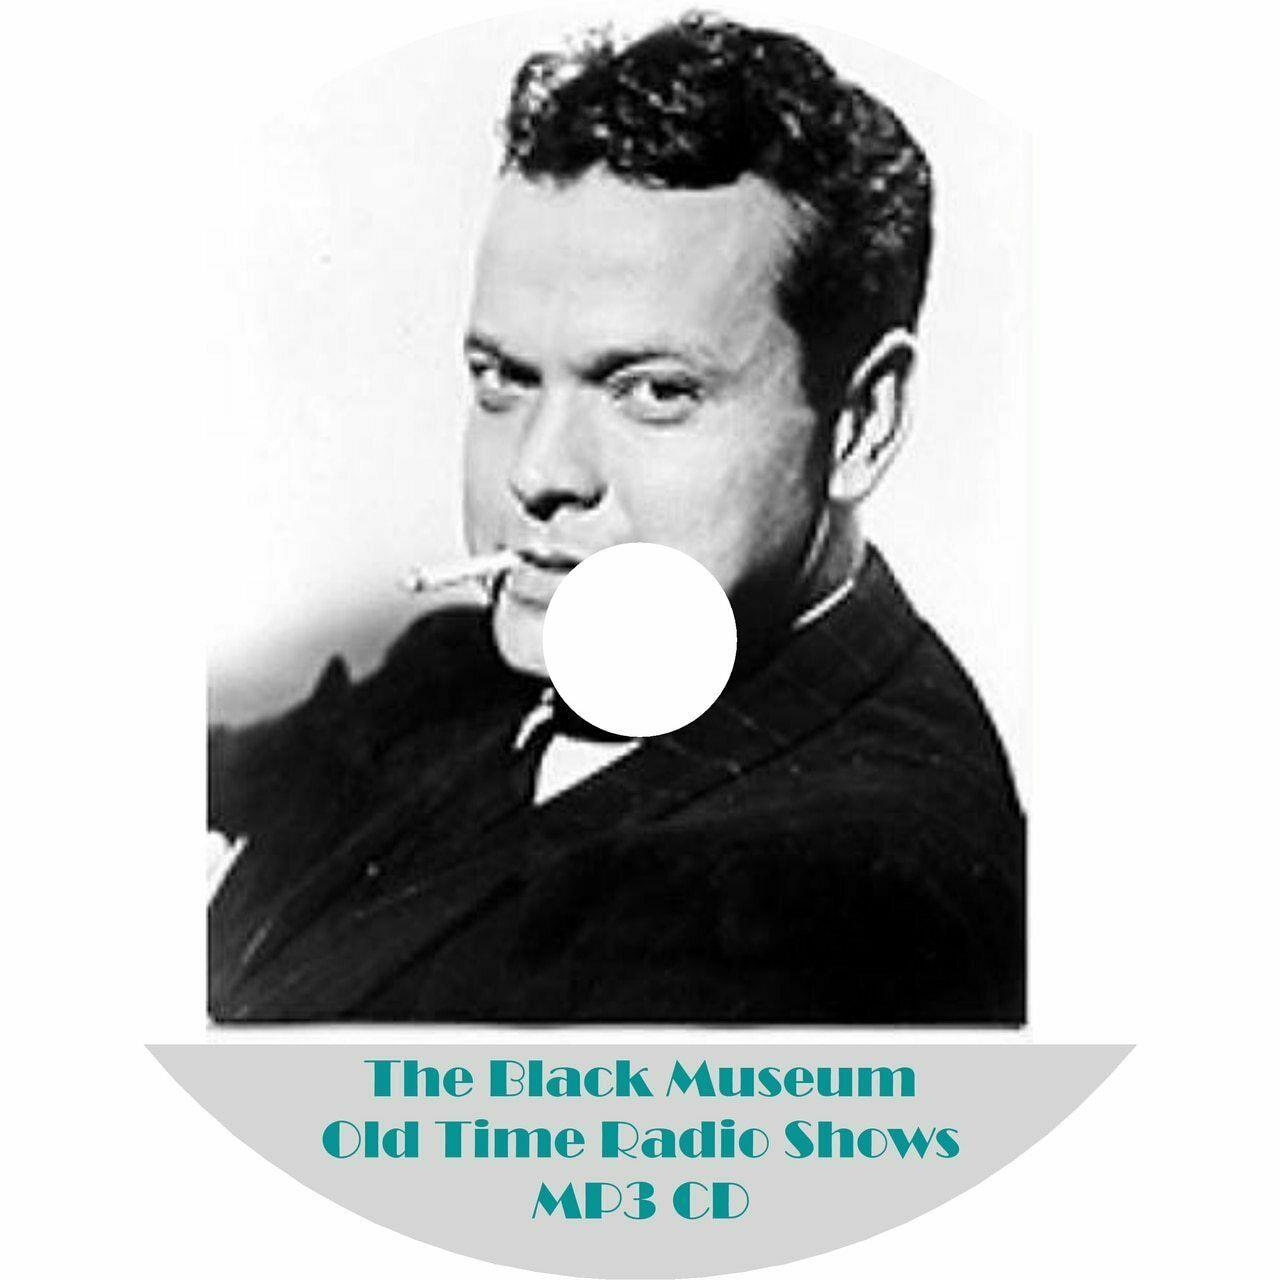 The Black Museum (BBC) OTR Old Time Radio Show MP3 On CD 53 Episodes